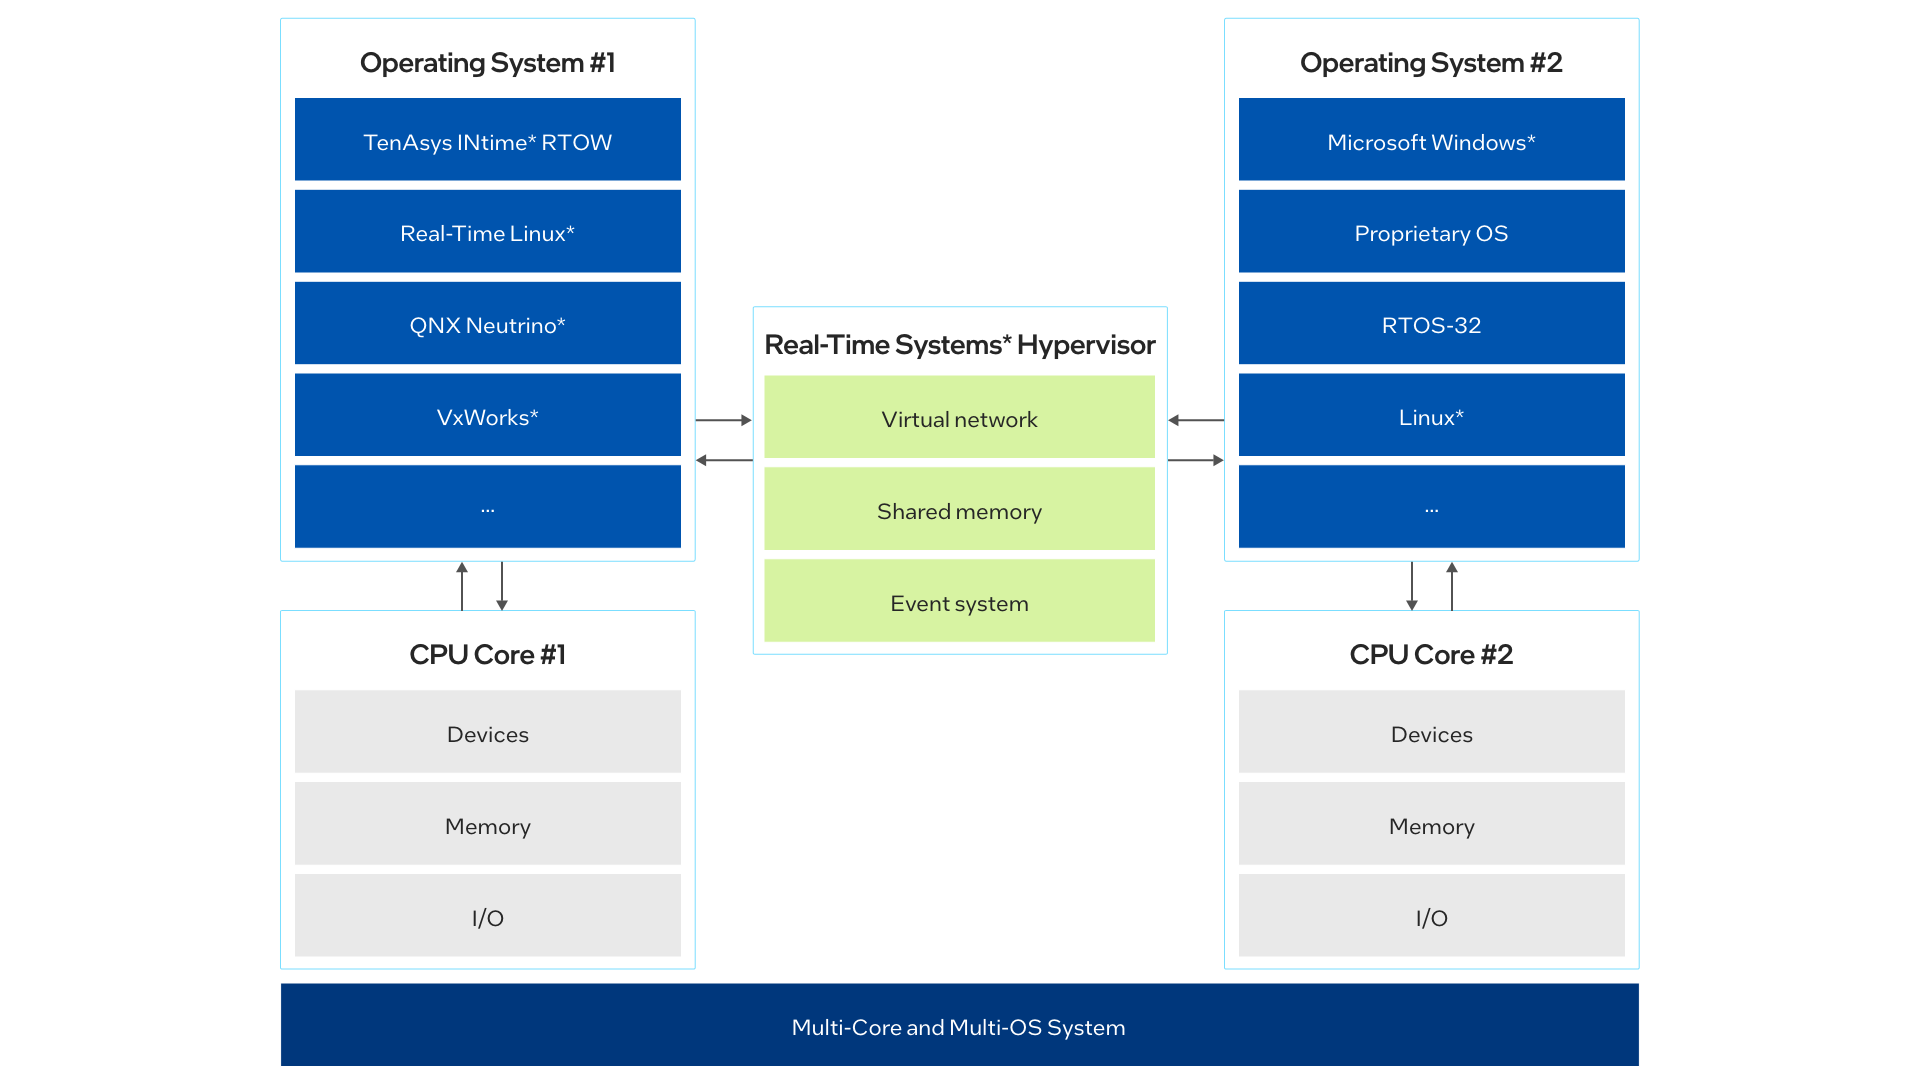 The complex block diagram has a box with Operating System #1 on the left side. It has arrows going to and from "Real-Time Hypervisor" box in the middle and to CPU Core #1 below it. The Real-Time Hypervisor box also has arrows going to and from Operating System #2 to the left of it, which has arrows going to and from CPU Core #2 below it.